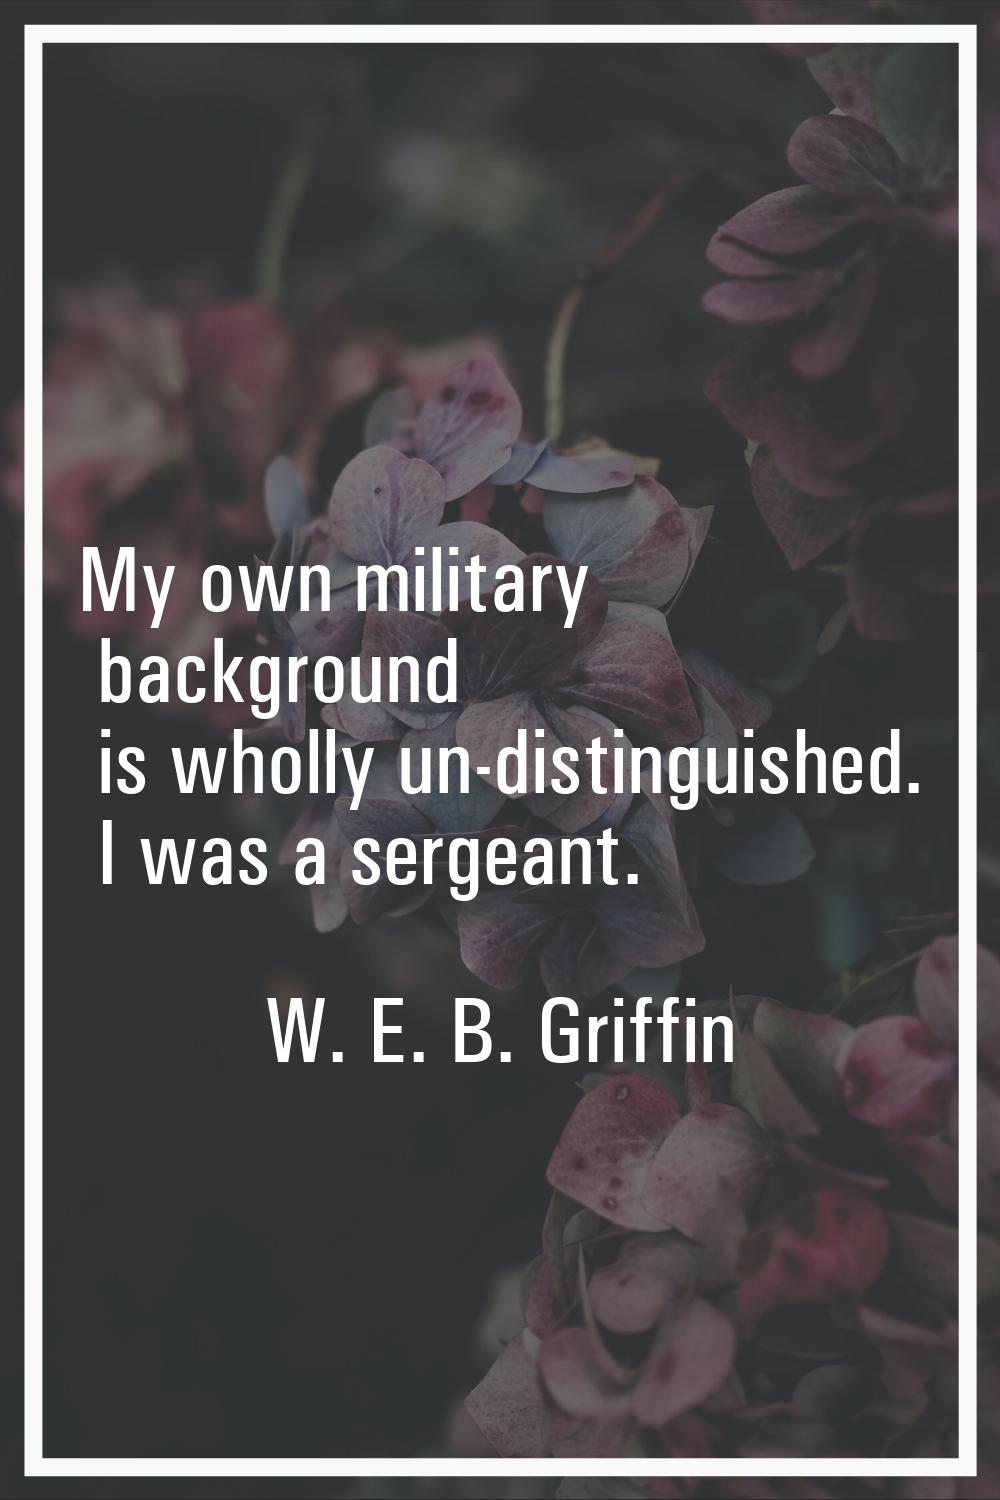 My own military background is wholly un-distinguished. I was a sergeant.